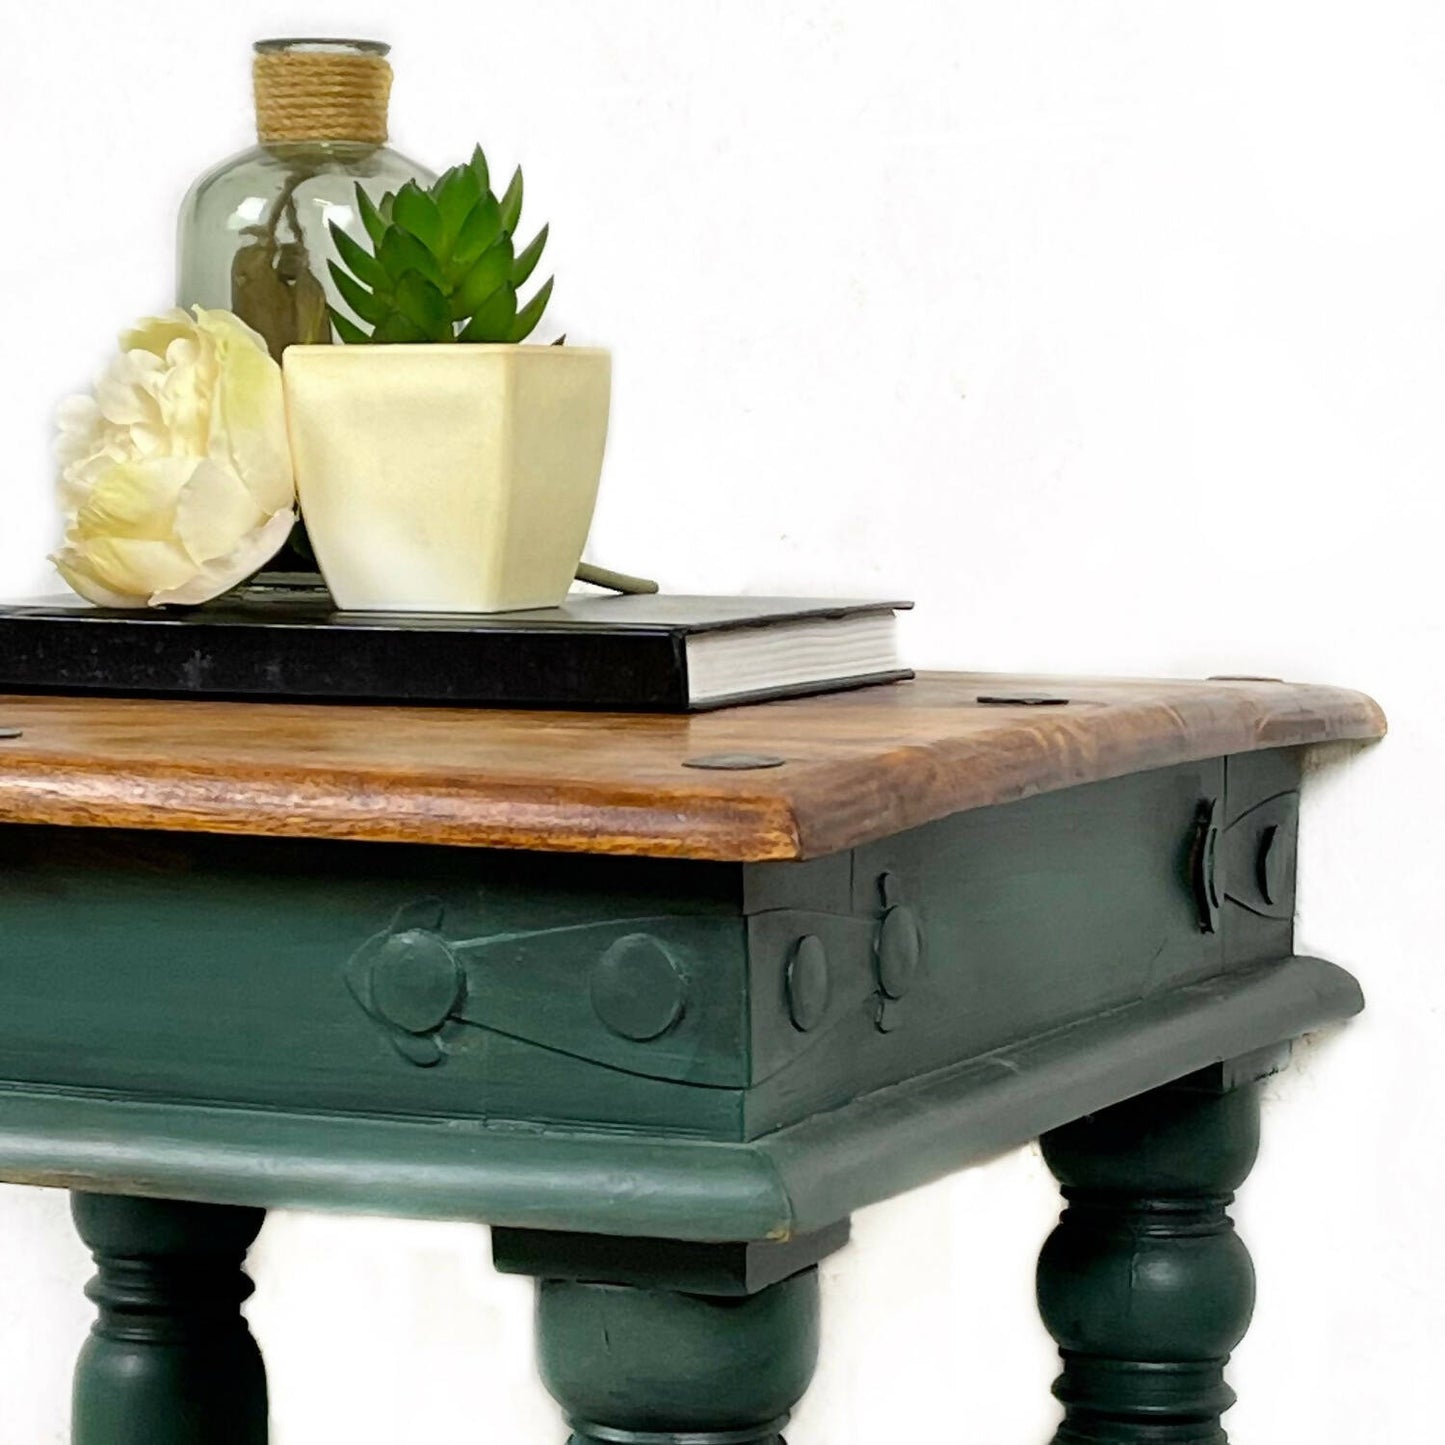 Green Lamp Vintage Table